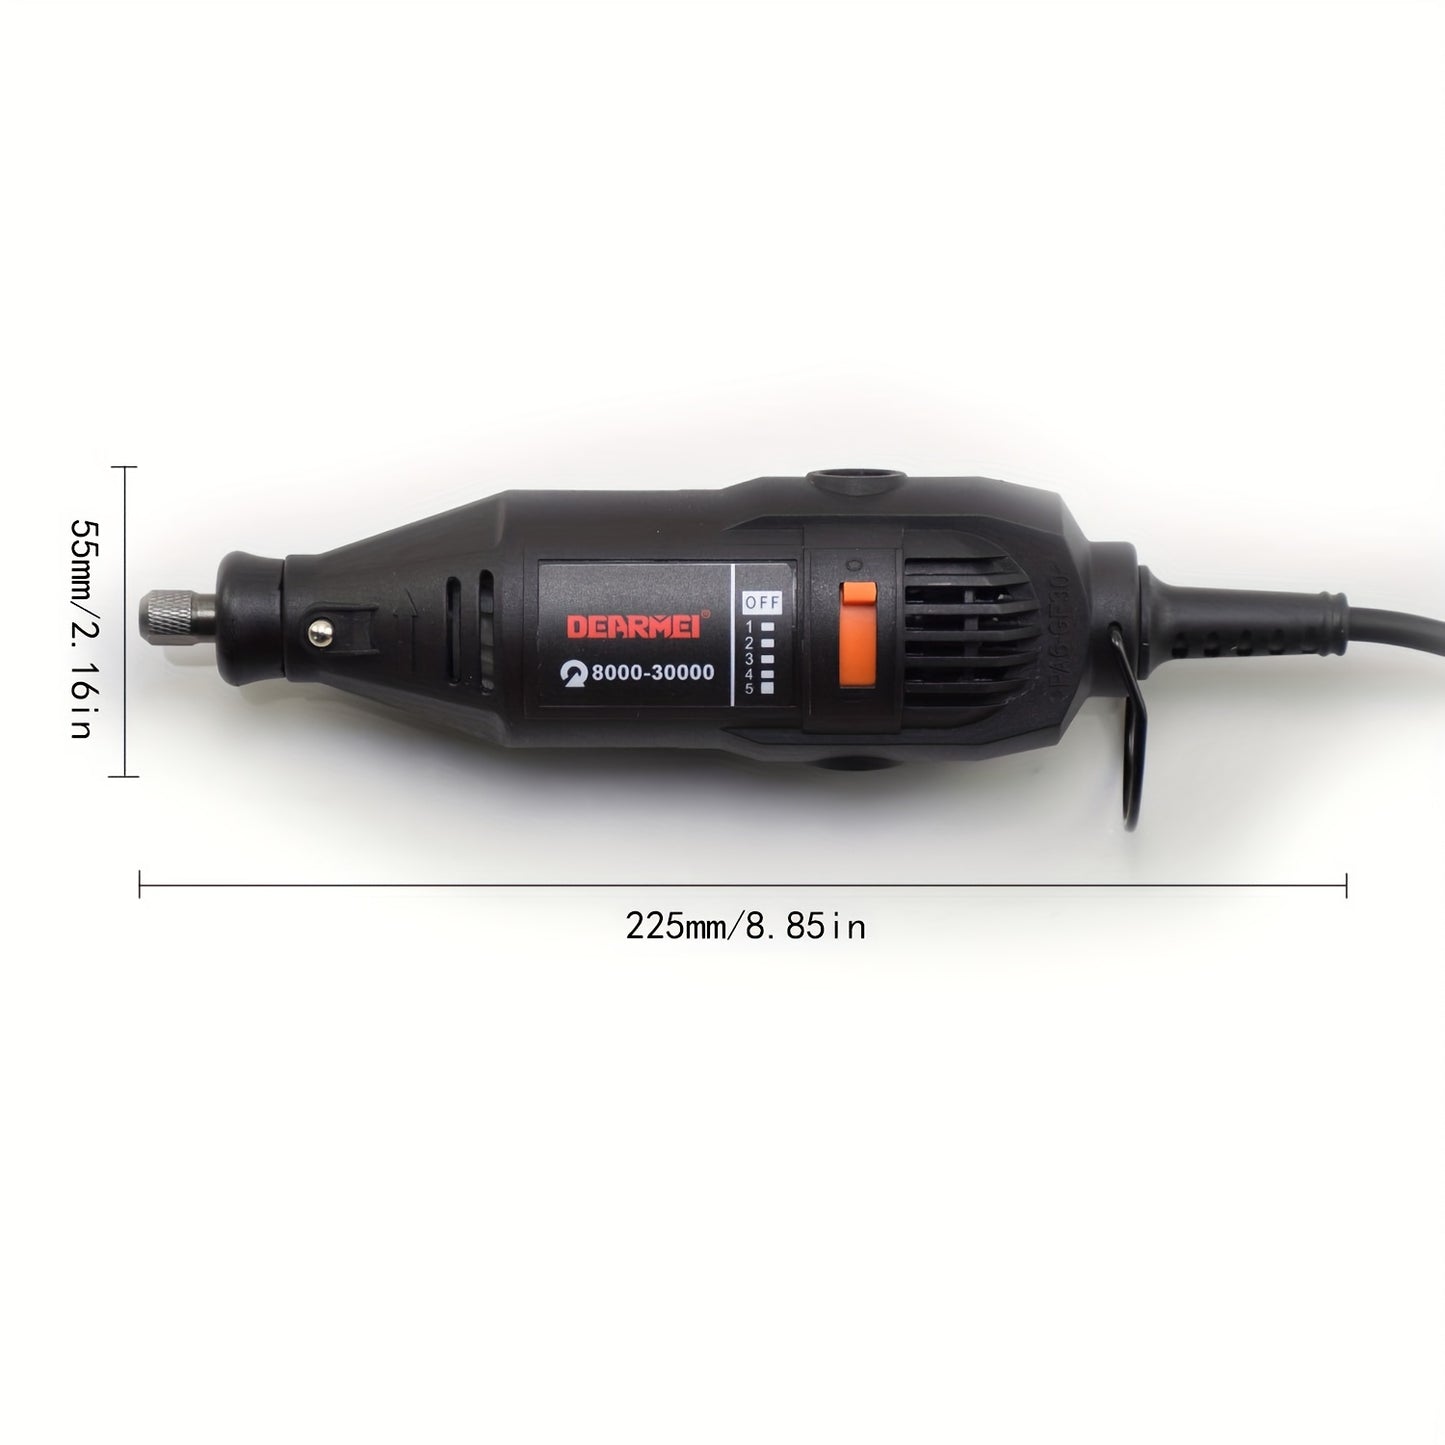 25\u002F28\u002F43pcs Rotary Tool Kit, Speed Adjustments 8000-30000RPM, Equipped With Flex Shaft And Multifunctional Chuck, 43 Accessories, Power Multipurpose Set For Craft Projects And DIY Creations